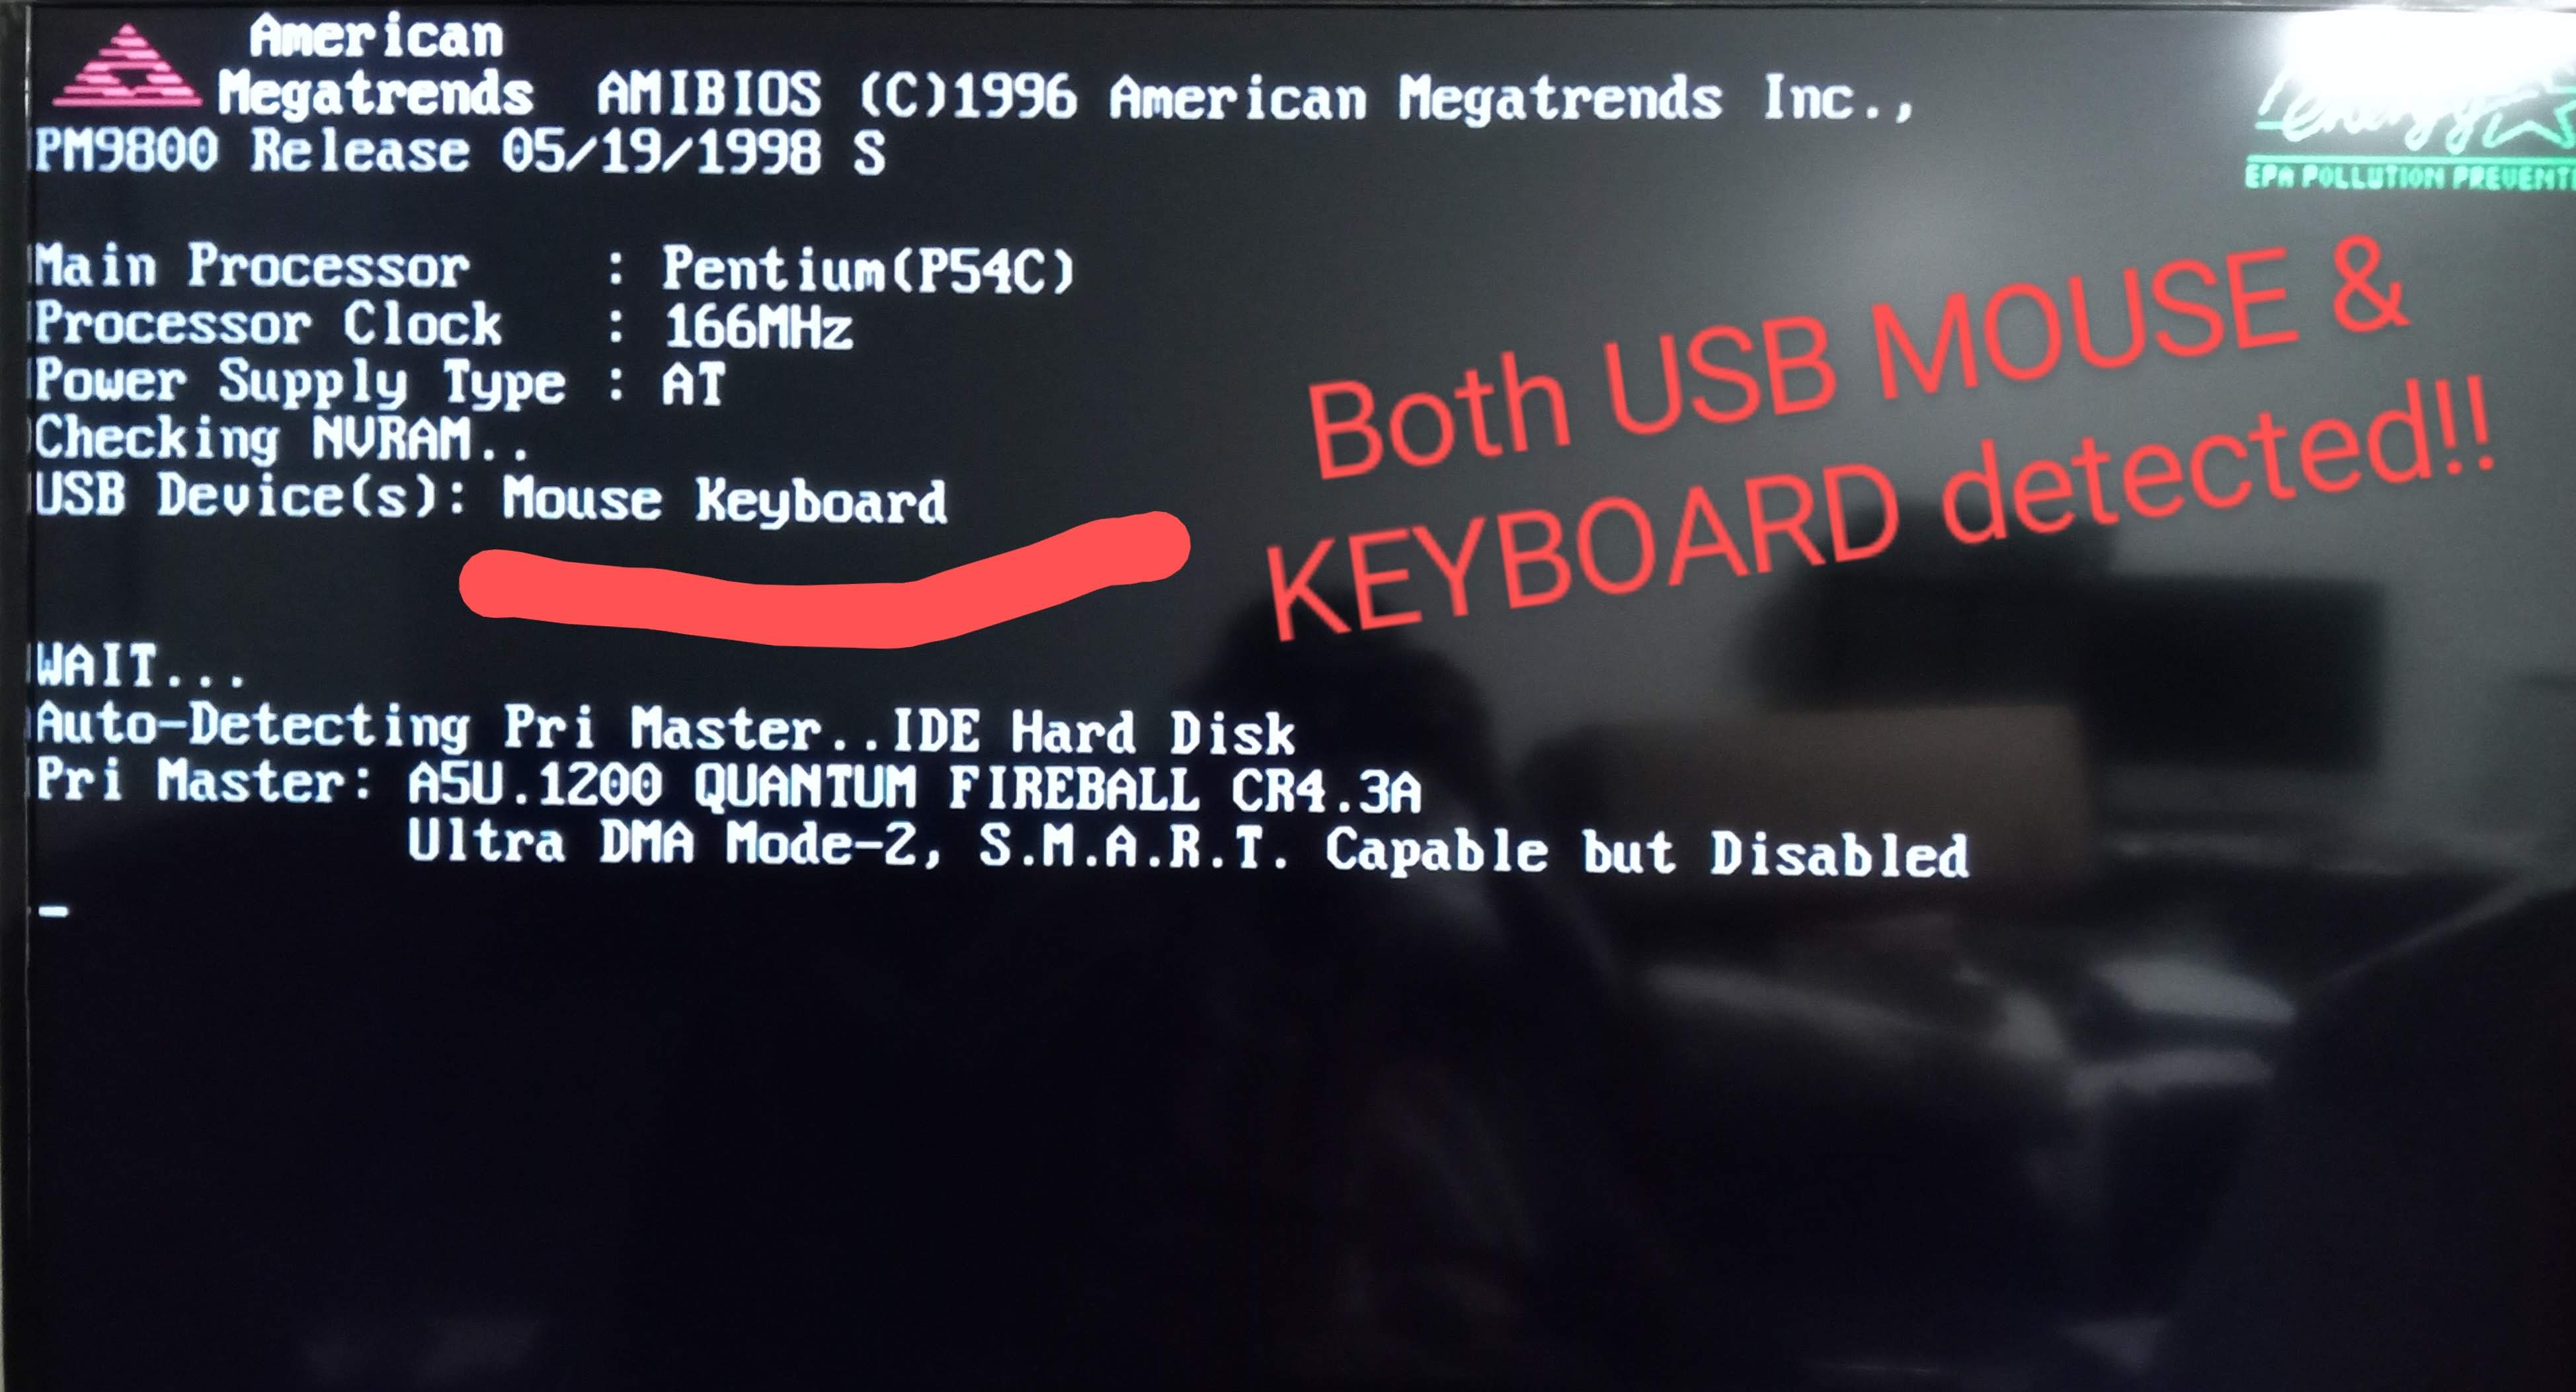 BOTH USB MOUSE & USB KEYBOARD Simultaneously Regognized by AMPTRON PM9800.jpg